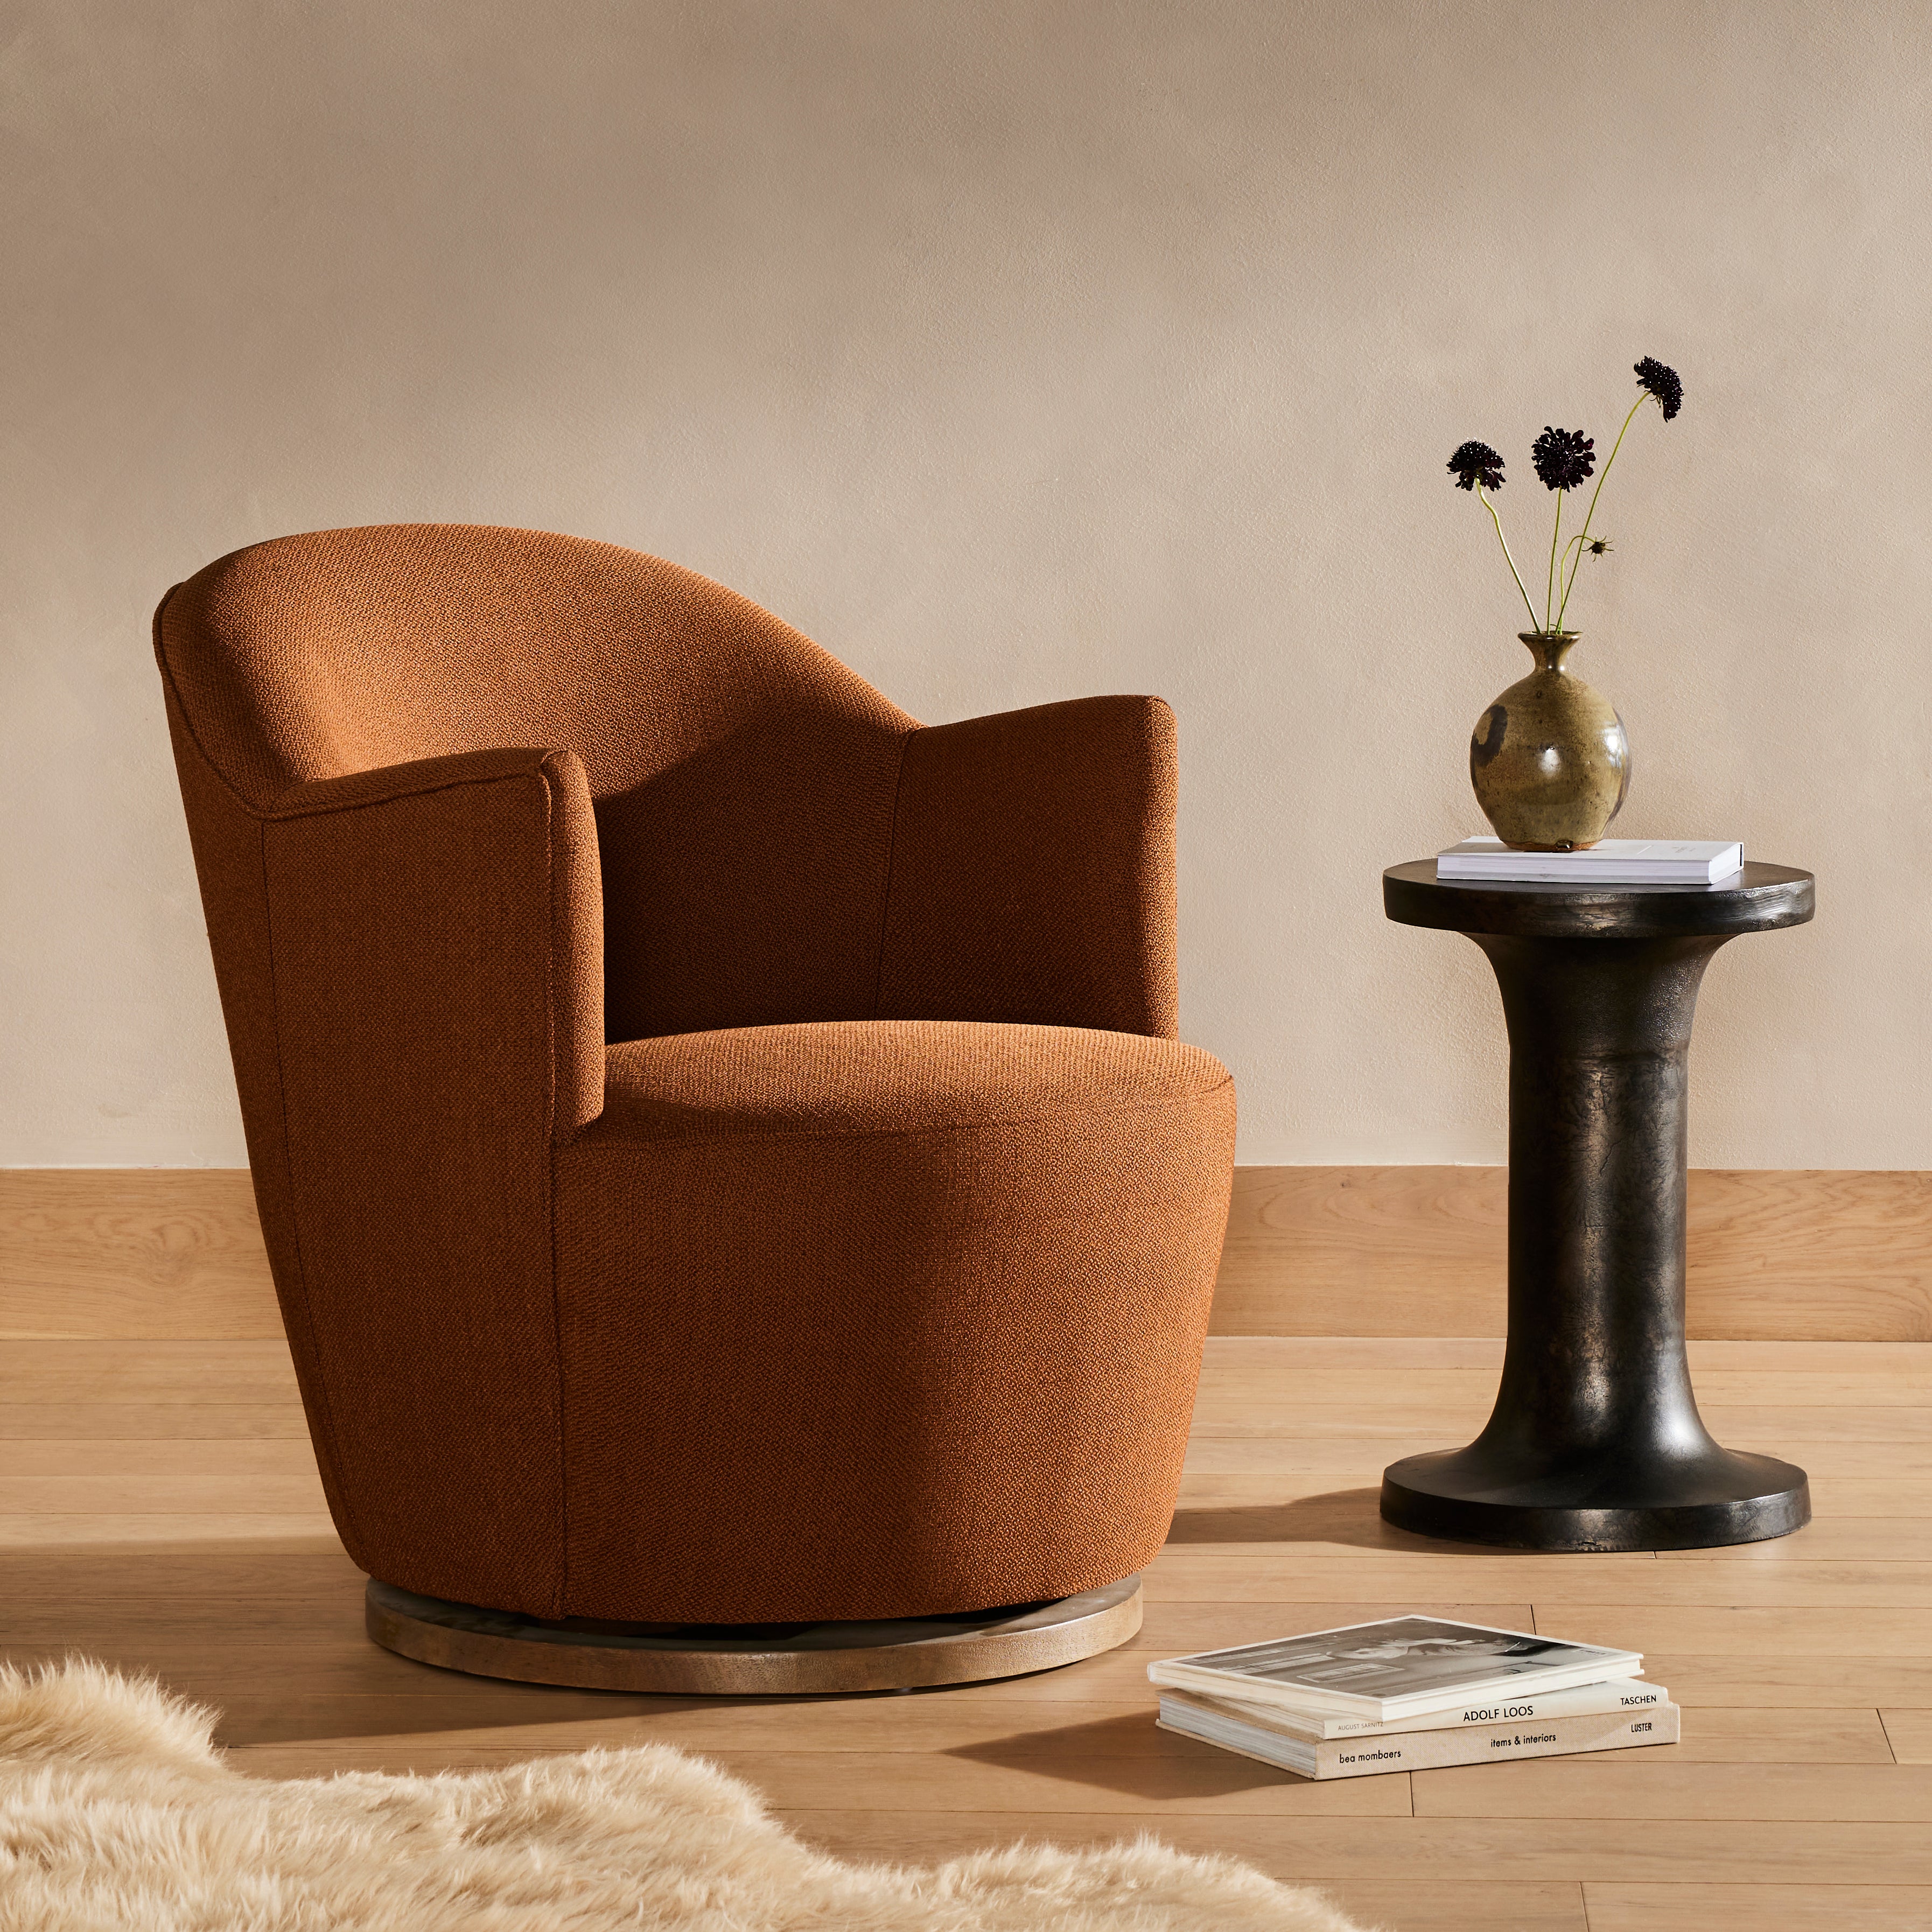 Intriguing while inviting. Drum-style seating is upholstered in a soothing and warm rust umber hue. A swivel base of natural parawood places a fresh spin on a feminine form. Amethyst Home provides interior design, new construction, custom furniture, and area rugs in the Omaha metro area.